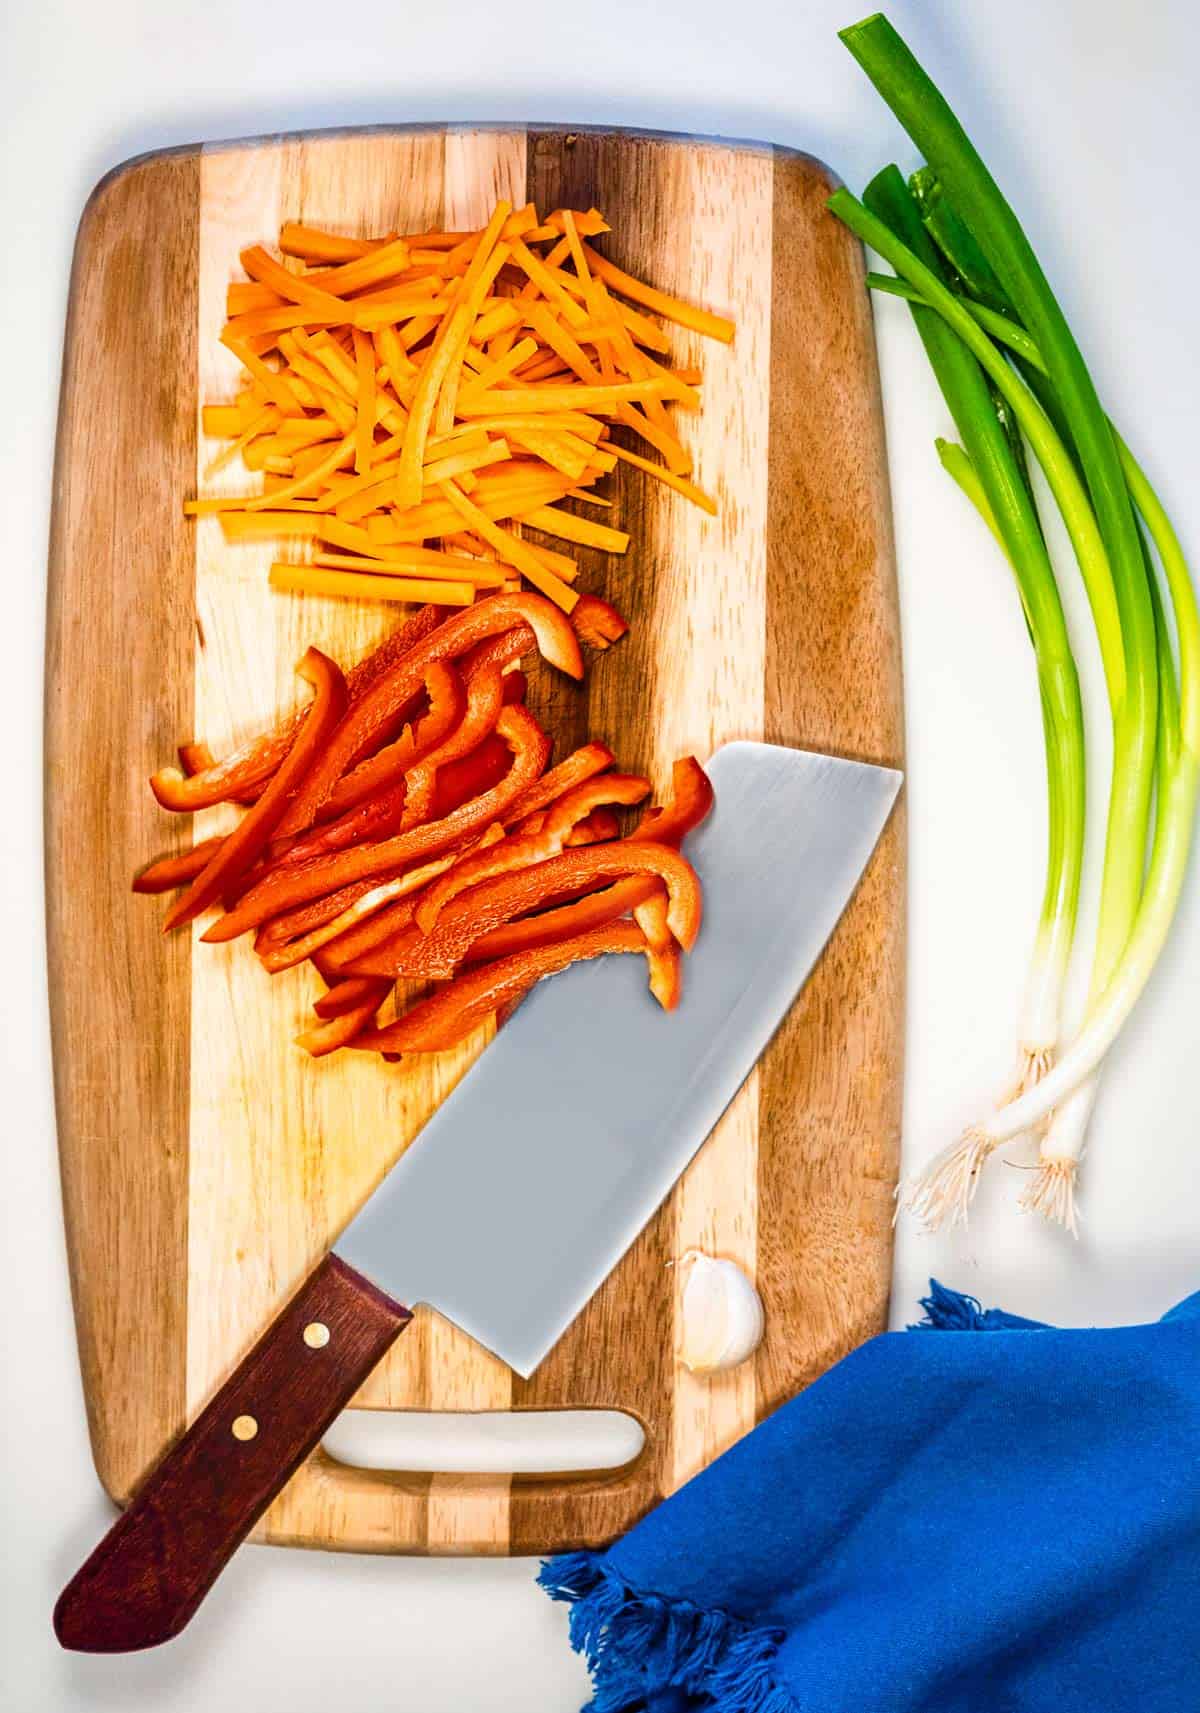 Julienned carrots and red bell pepper on a cutting board with a knife.